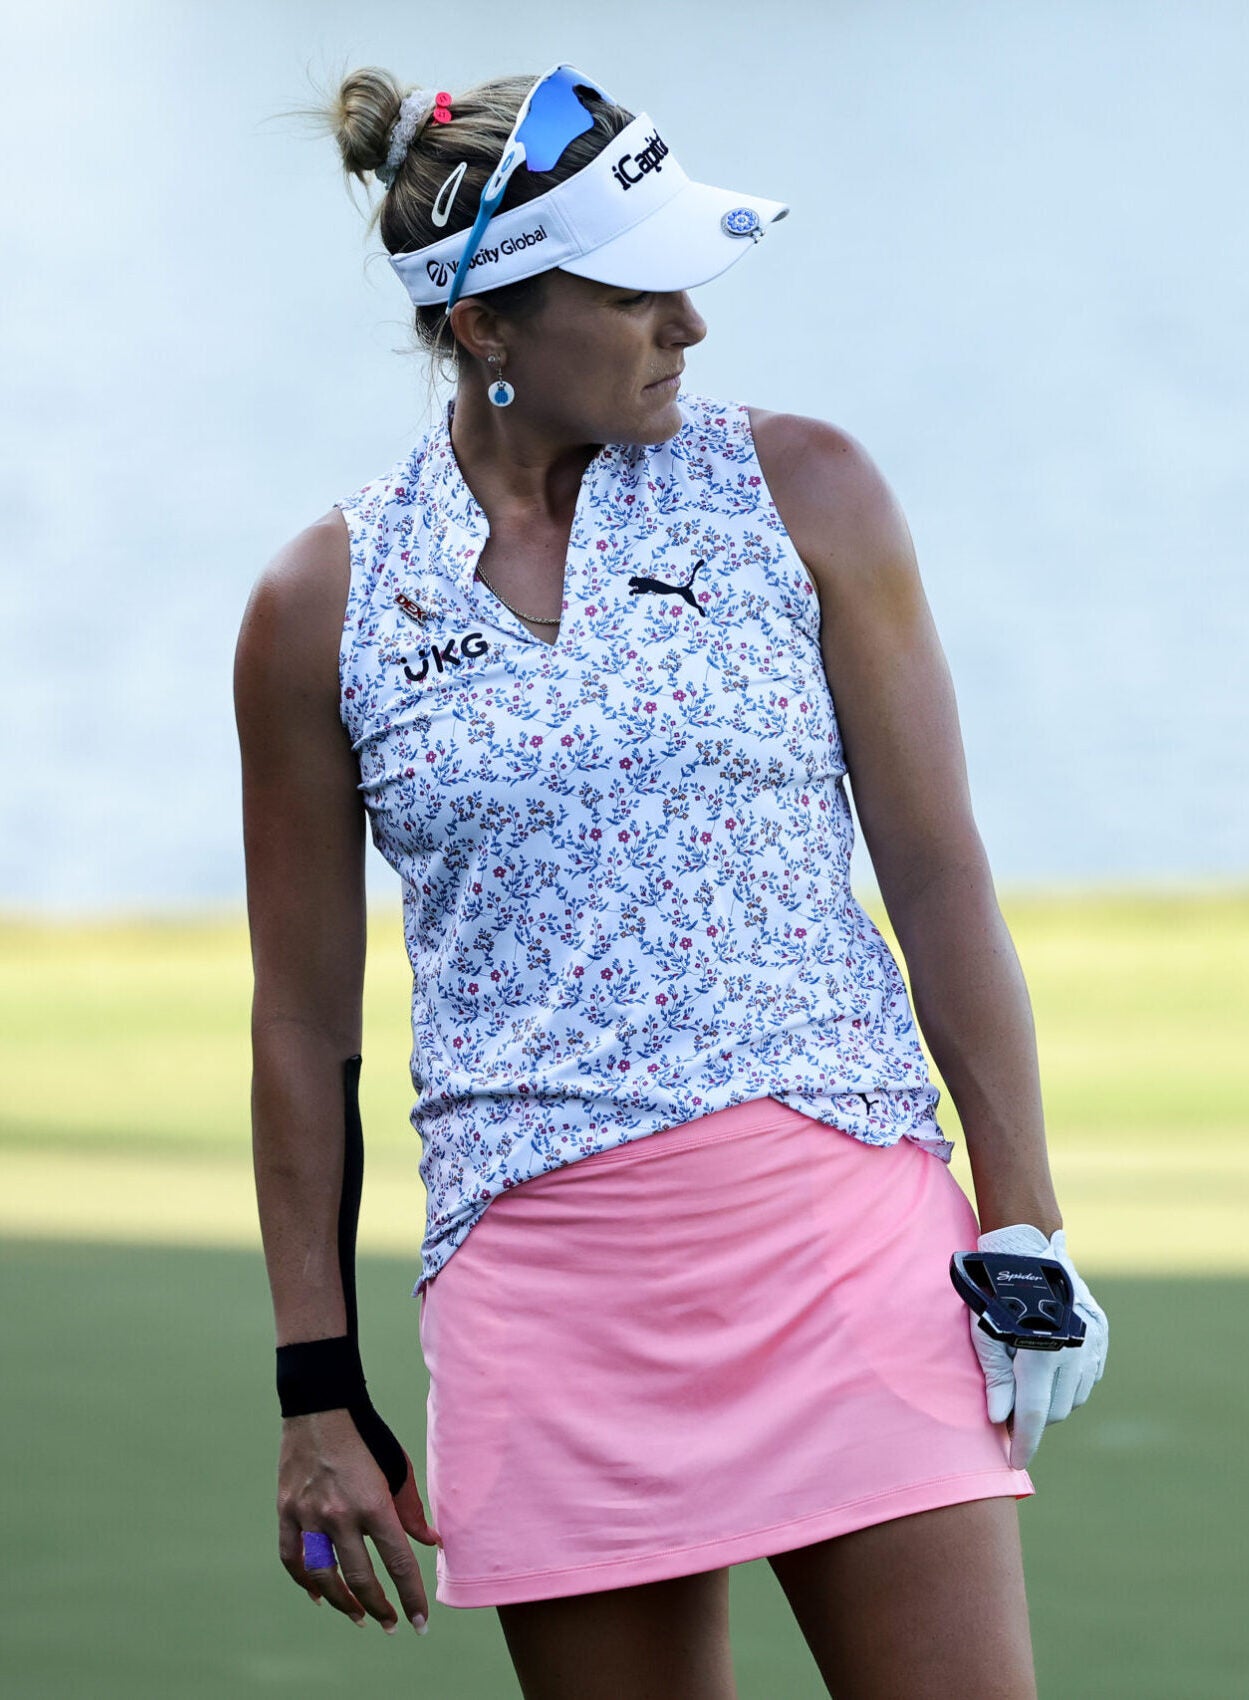 THE WOODLANDS, TX - APRIL 21: Lexi Thompson of the United States stands on the ninth green during the second round of the Chevron Championship at The Club at Carlton Woods on April 21, 2023 in The Woodlands, Texas.  (Photo by Stacy Revere/Getty Images)